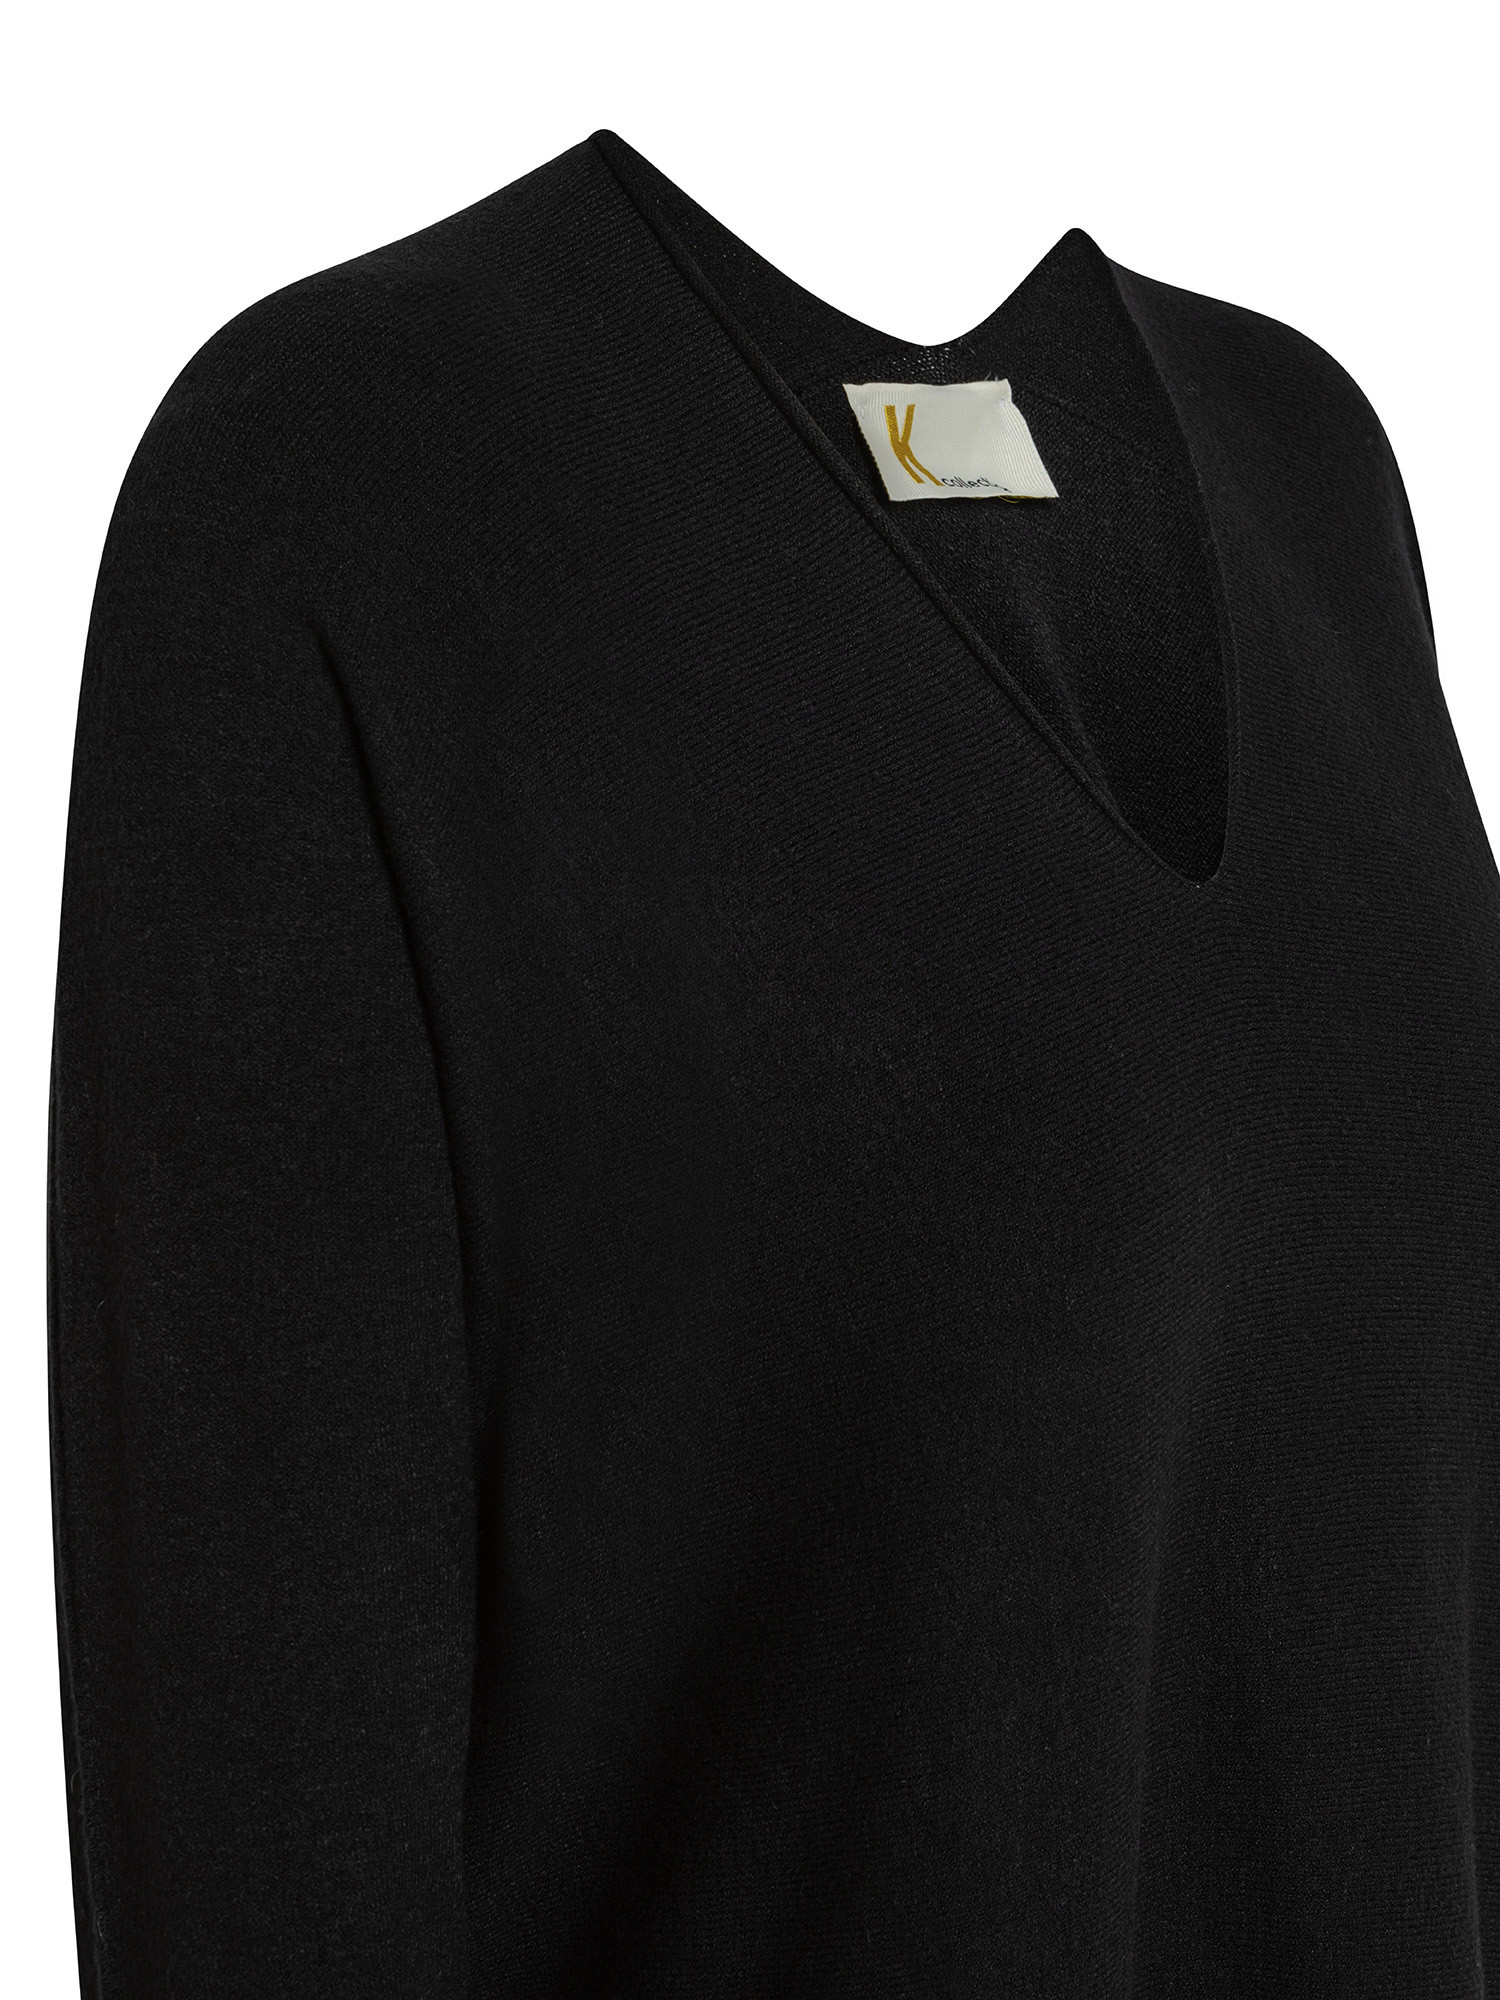 K Collection - Pullover, Nero, large image number 2